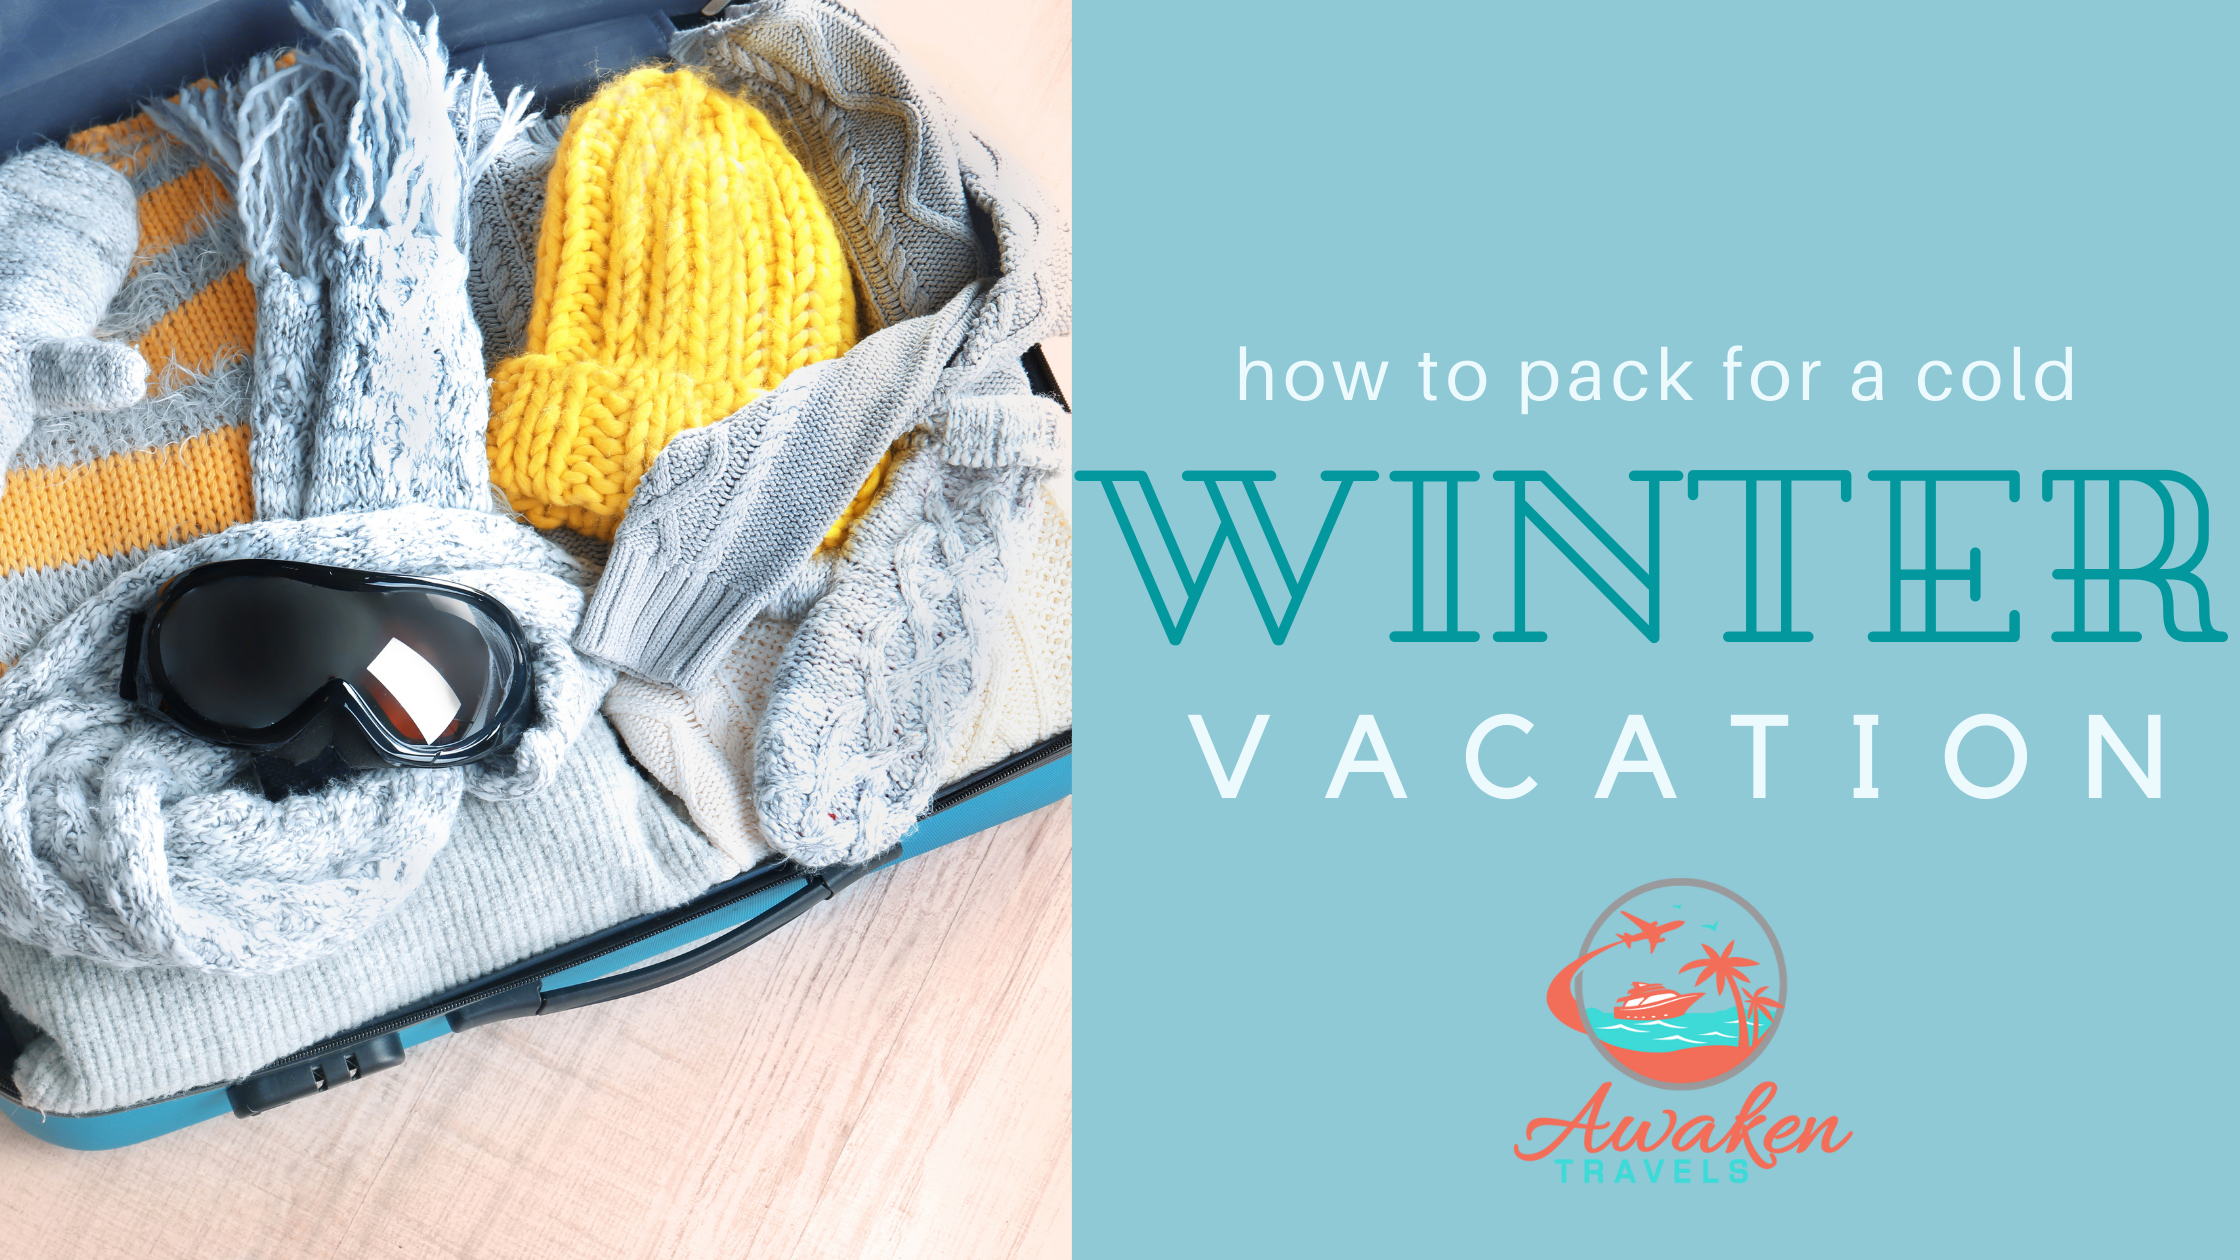 winter weather packing guide cover image